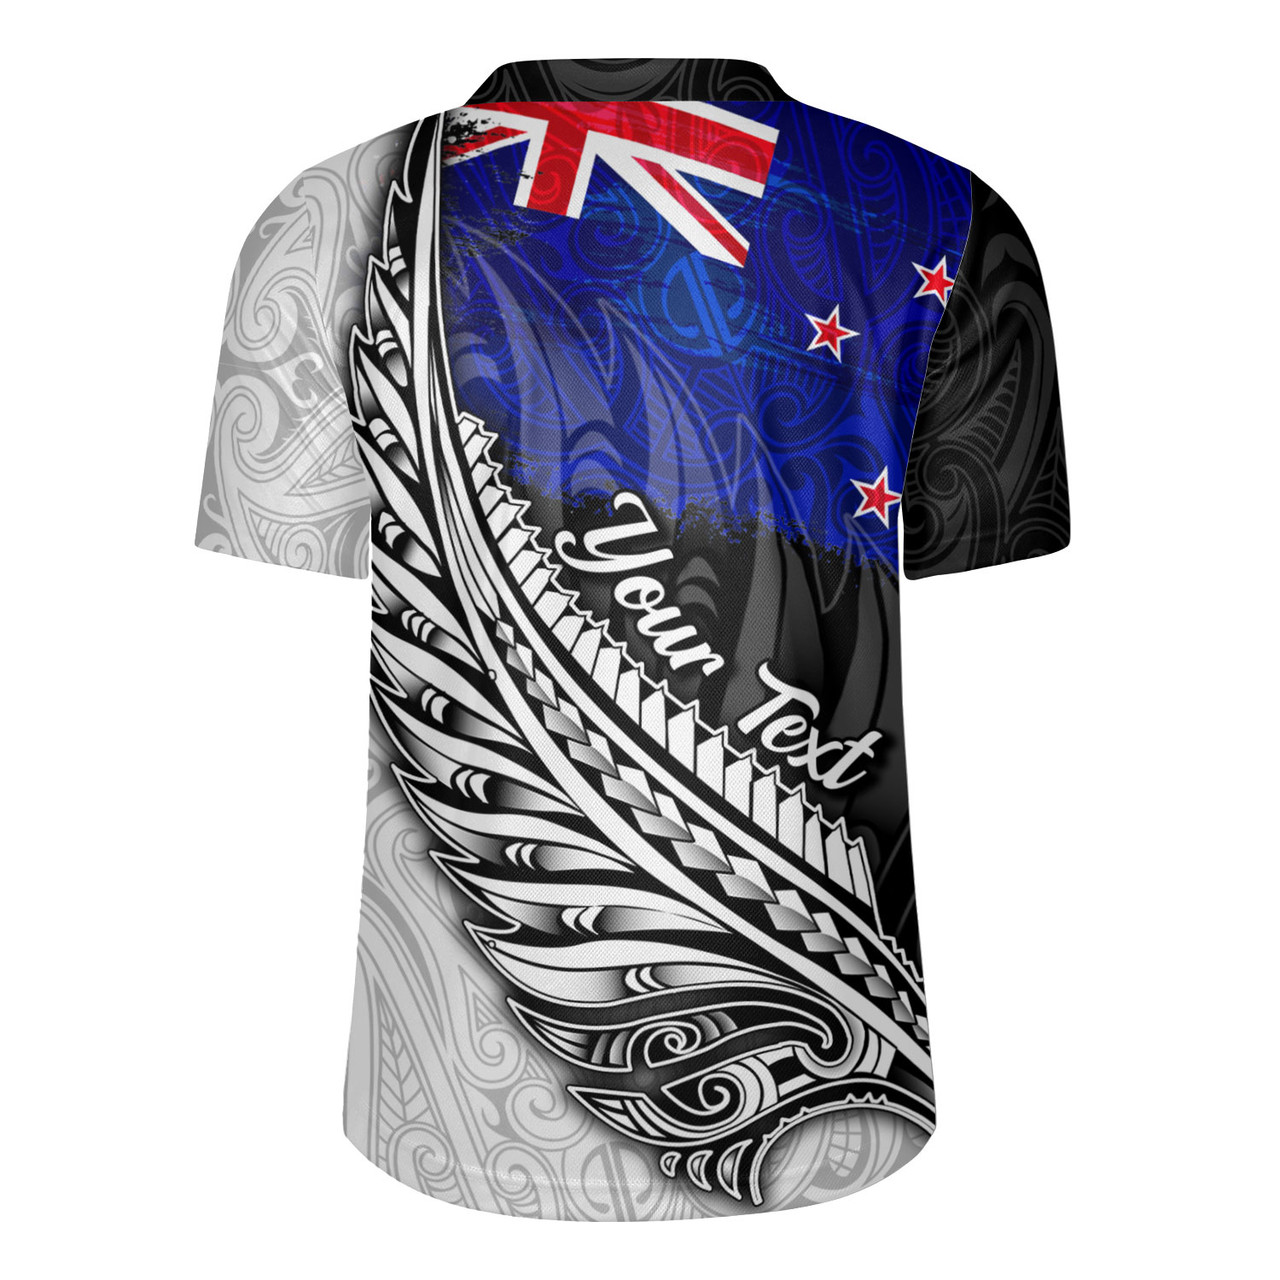 New Zealand Custom Personalised Rugby Jersey Maori Silver Fern Flag Vibes